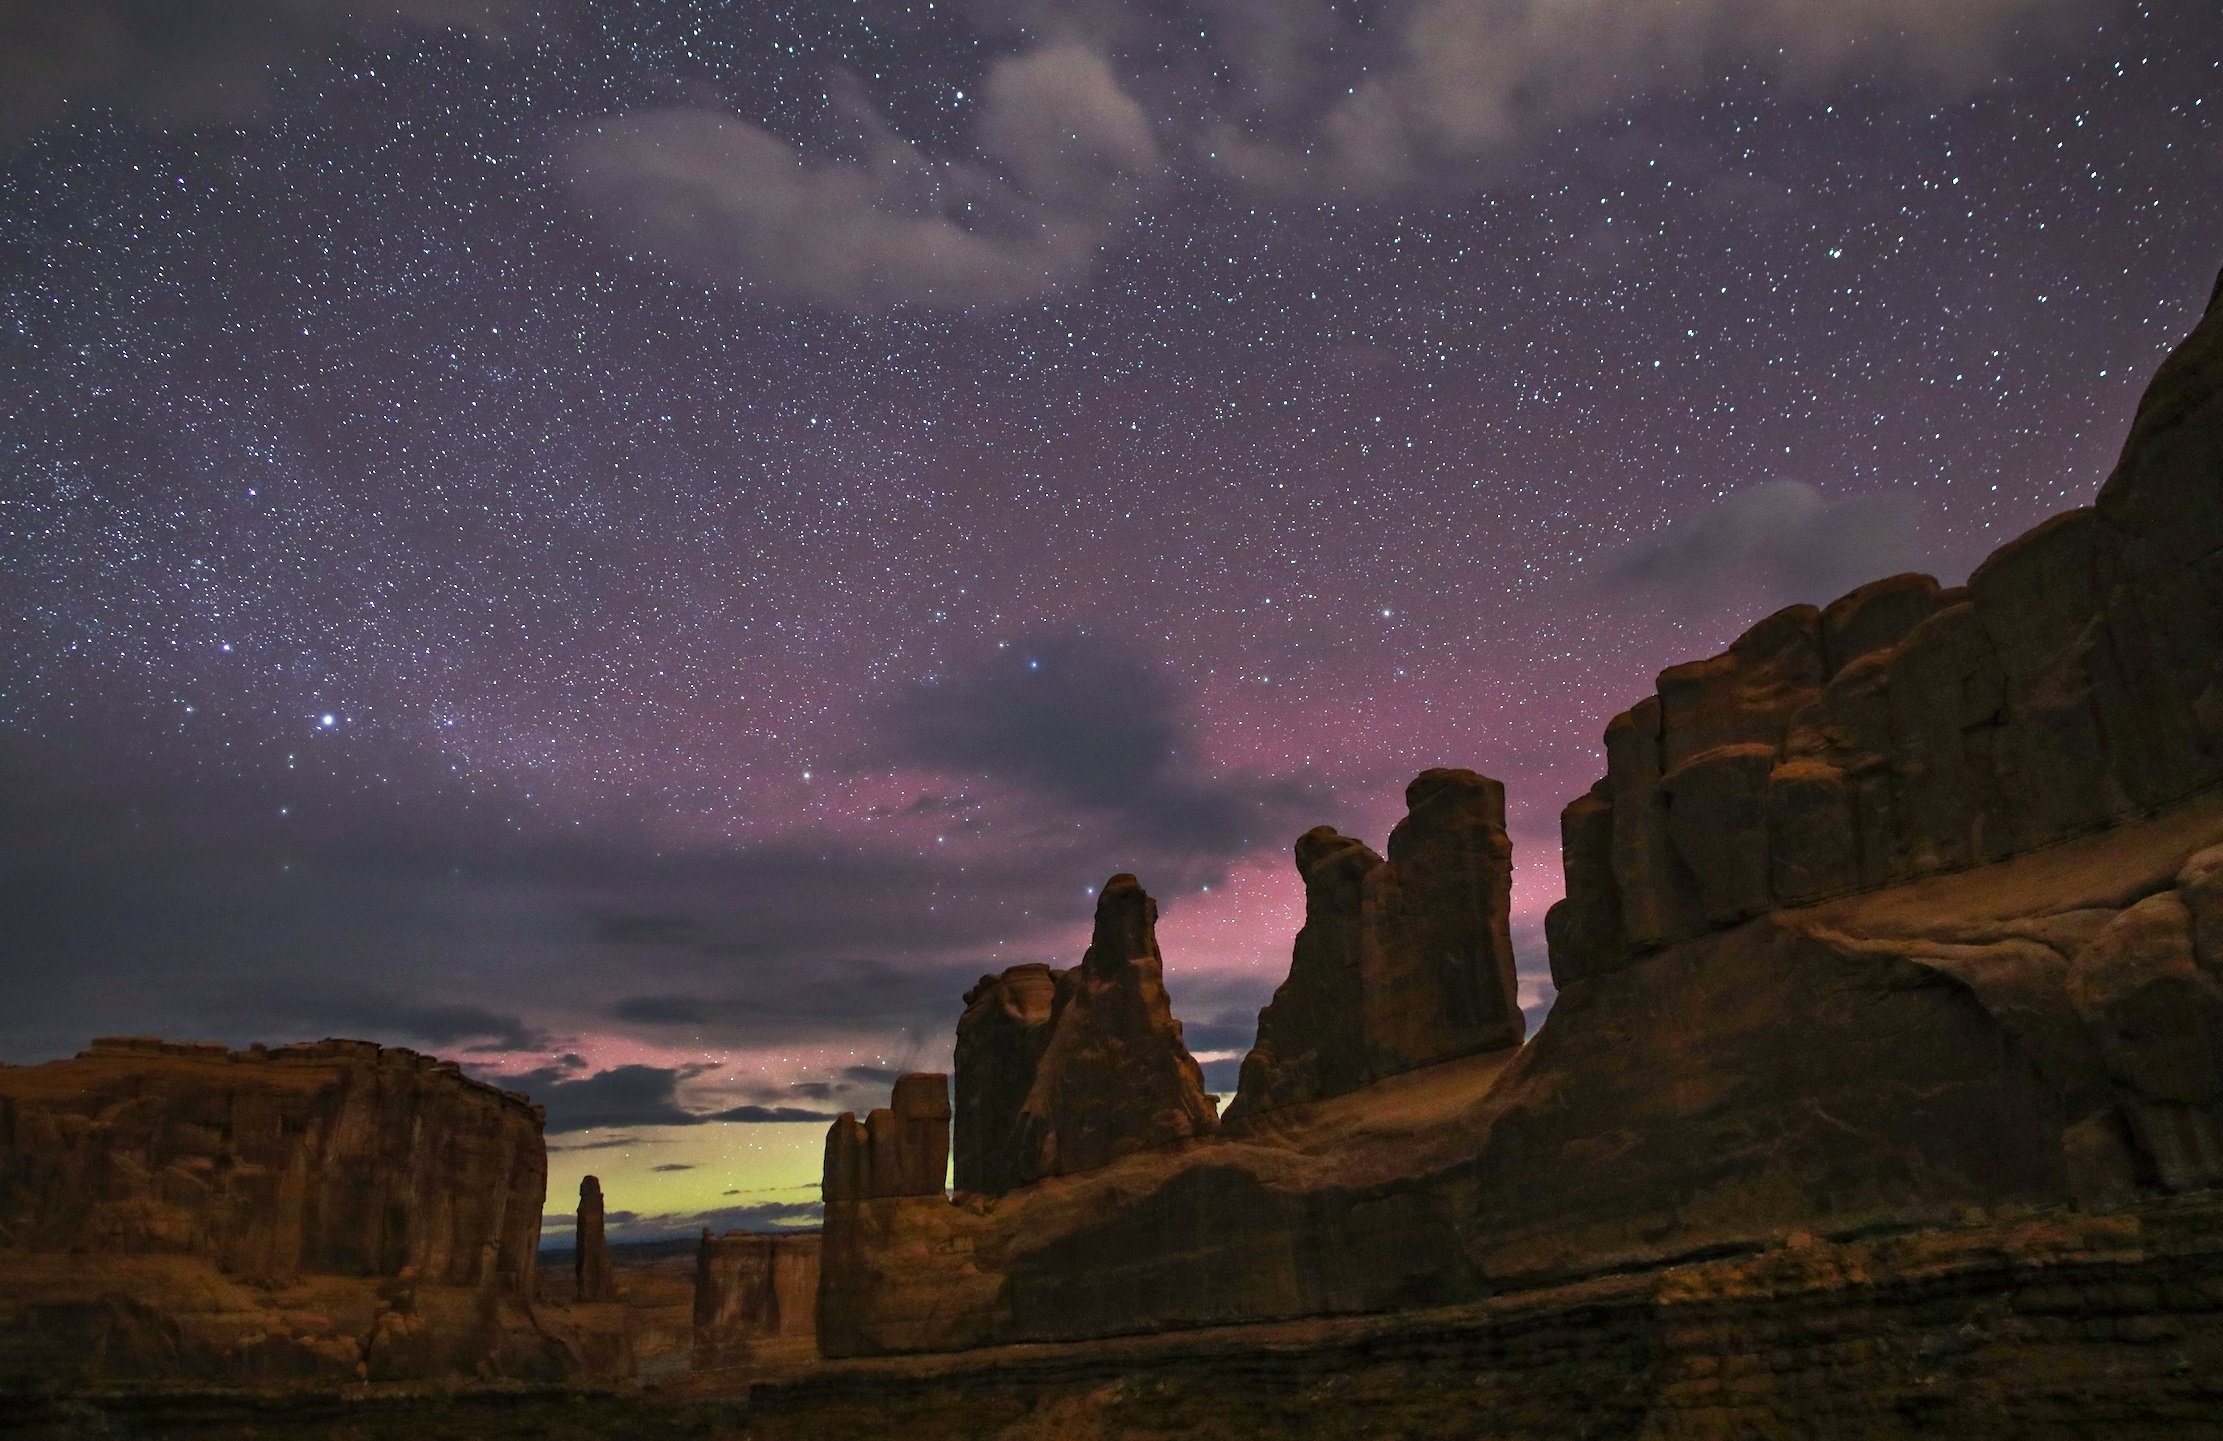 slihouetted towers of sandstone at night. in the sky is a diffuse glow of yellow and red